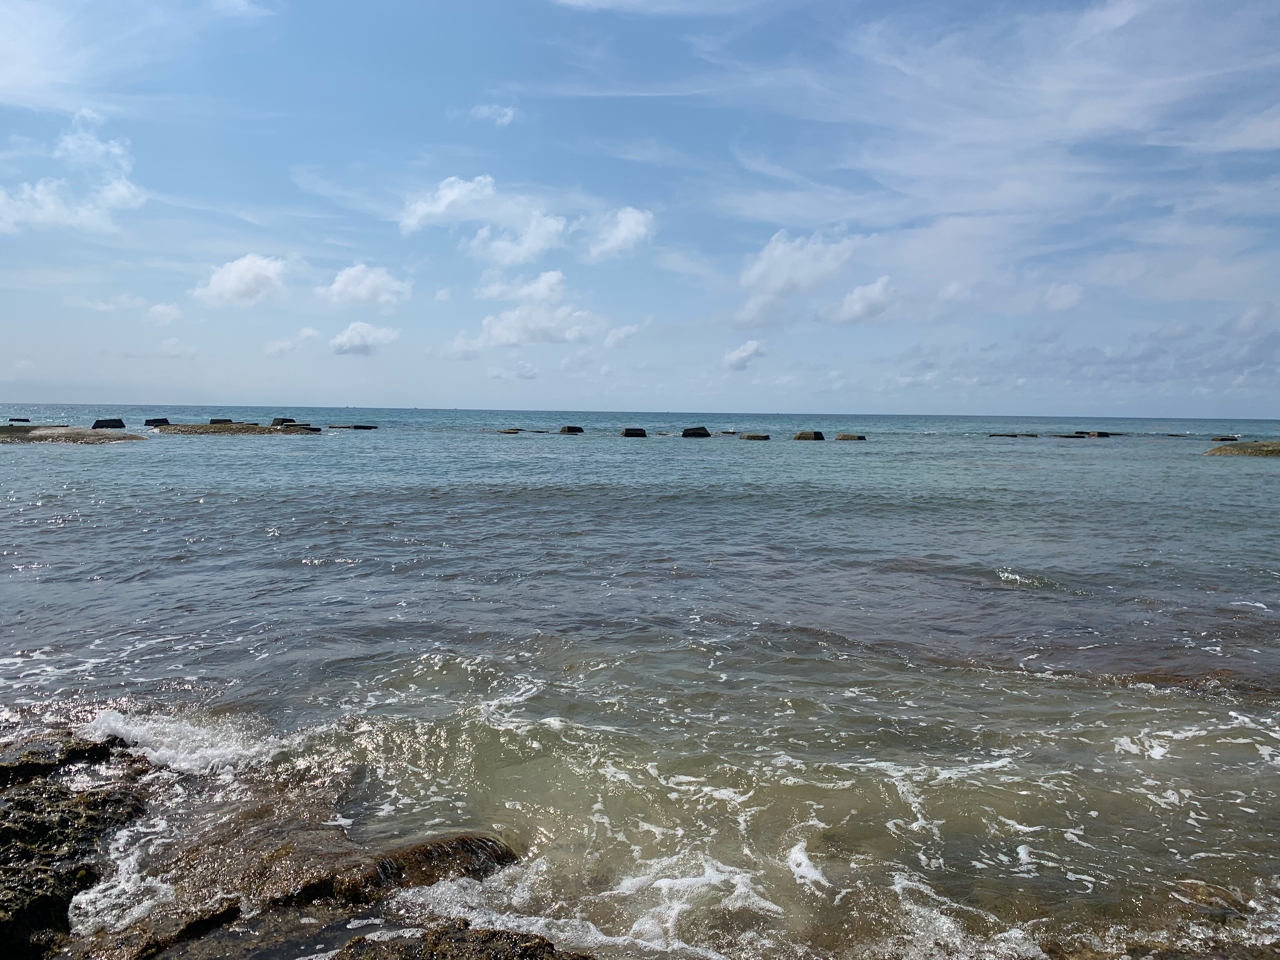 The Kan-Kanán artificial reef stretches for 1.9 km along the coastline to prevent the beach from eroding and to provide a new habitat to encourage biodiversity growth.